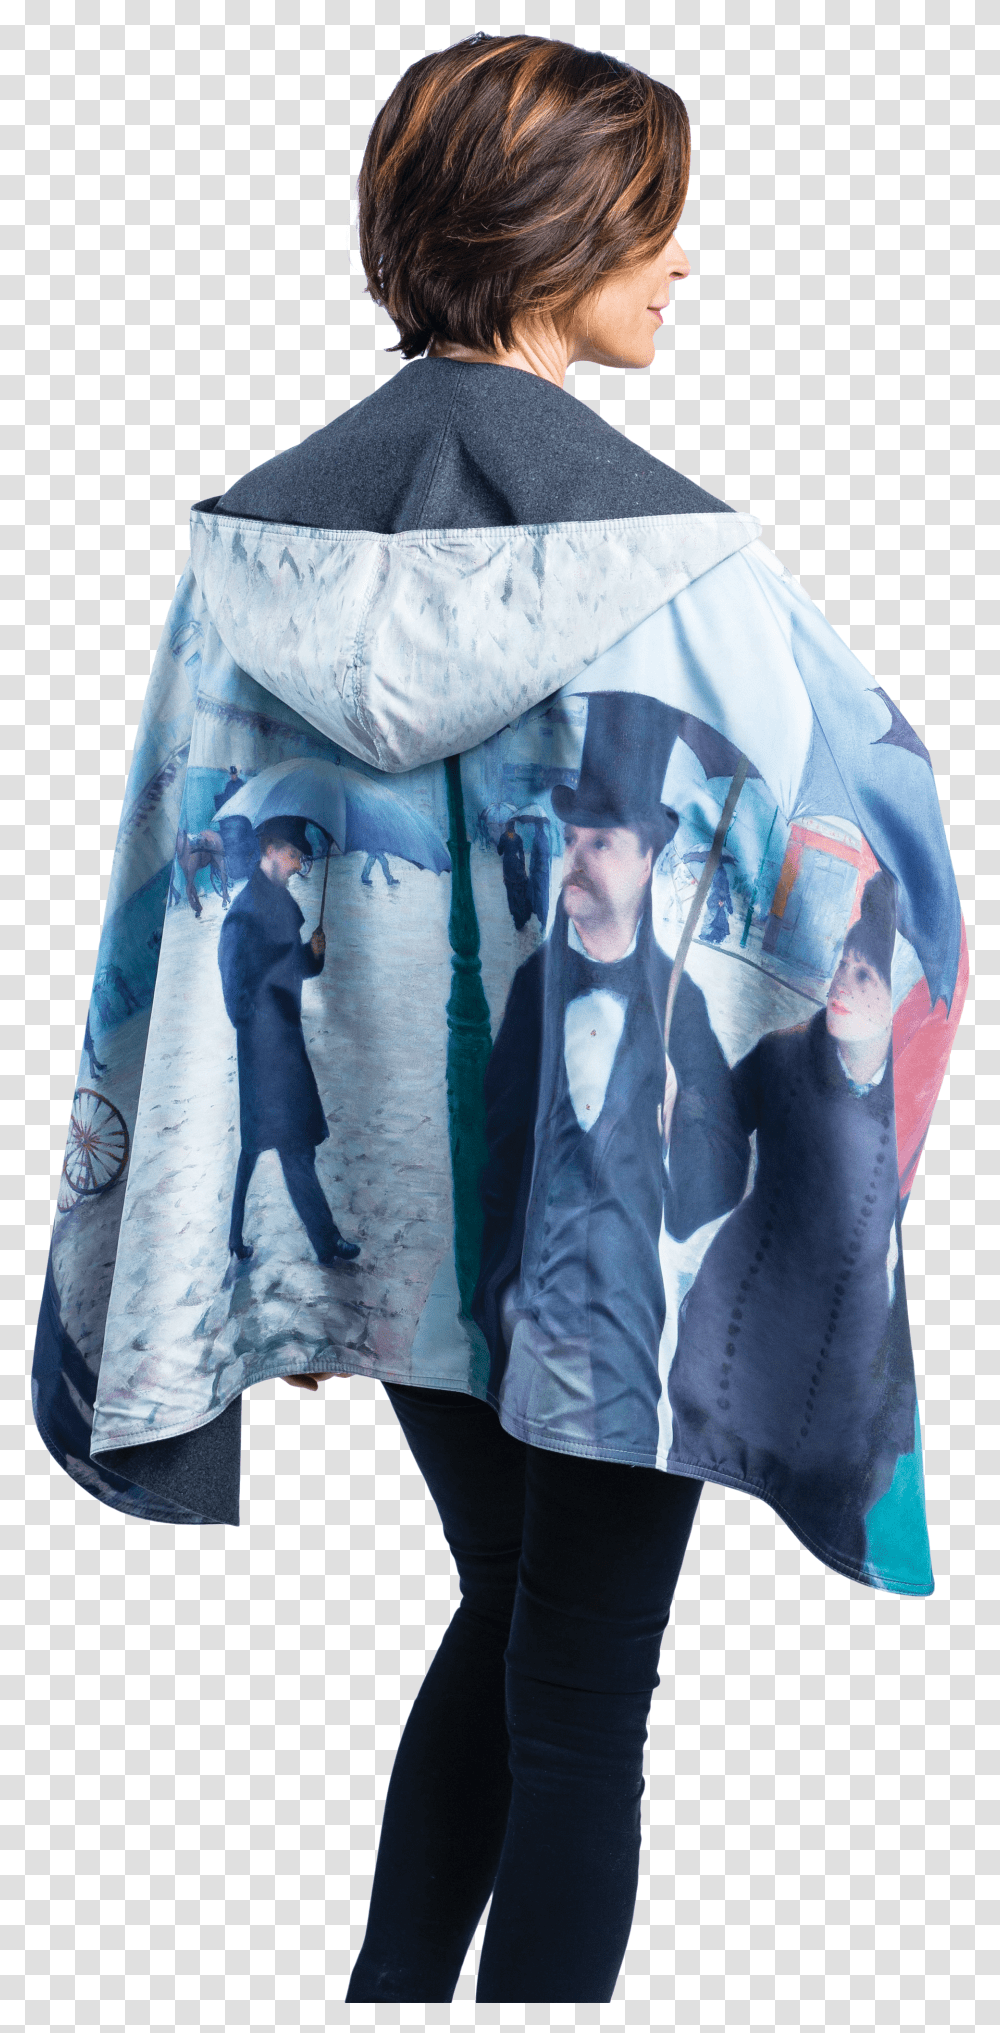 The Warmcaper Is A Cooler Weather Option From Raincaper Girl Transparent Png